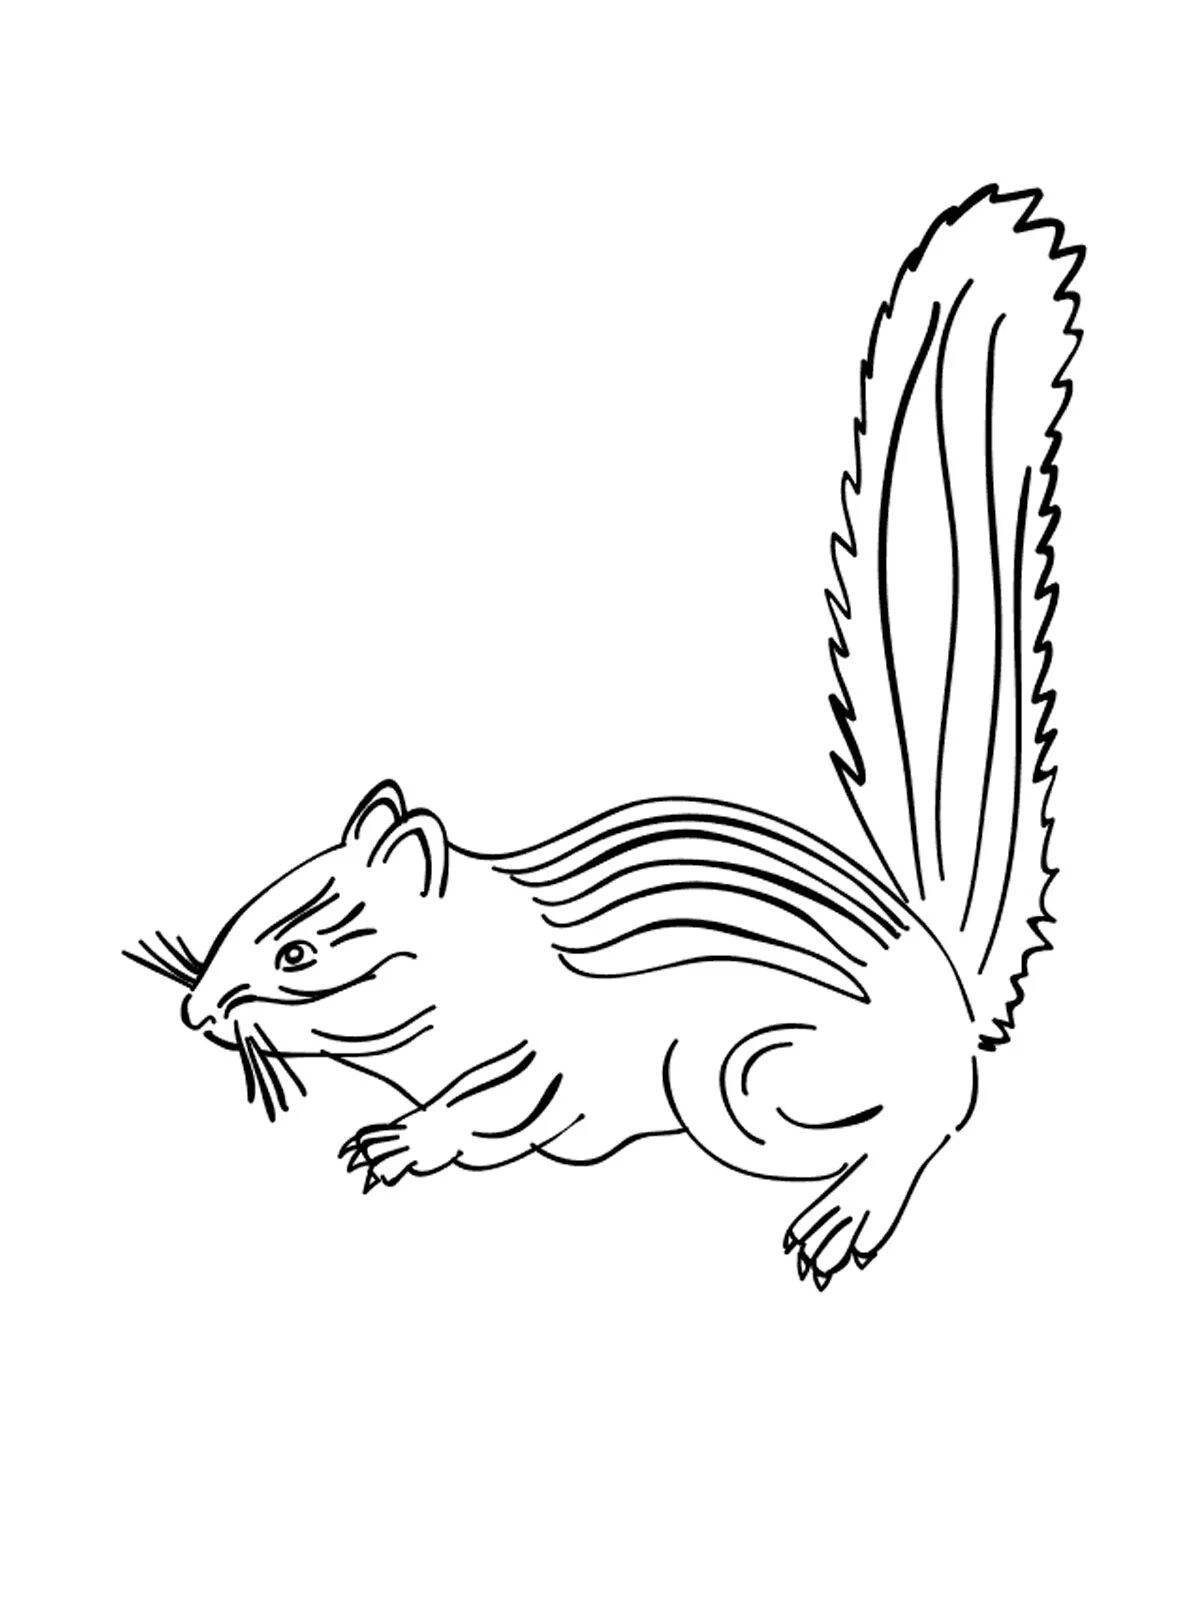 Cheerful chipmunk coloring for kids